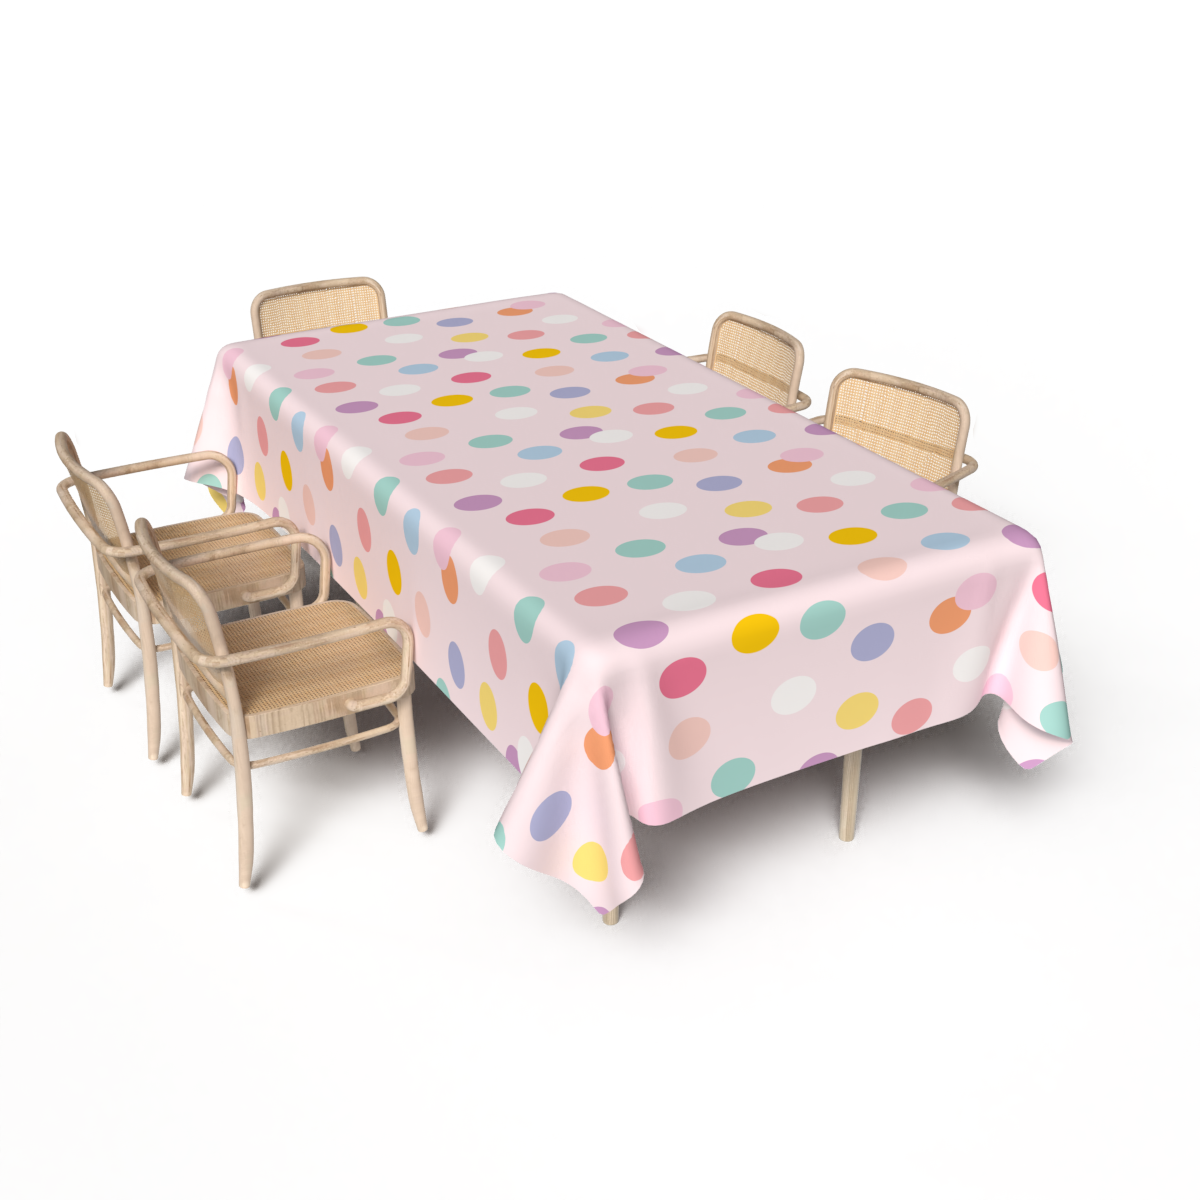 Table cloth - multiple sizes - ROM575